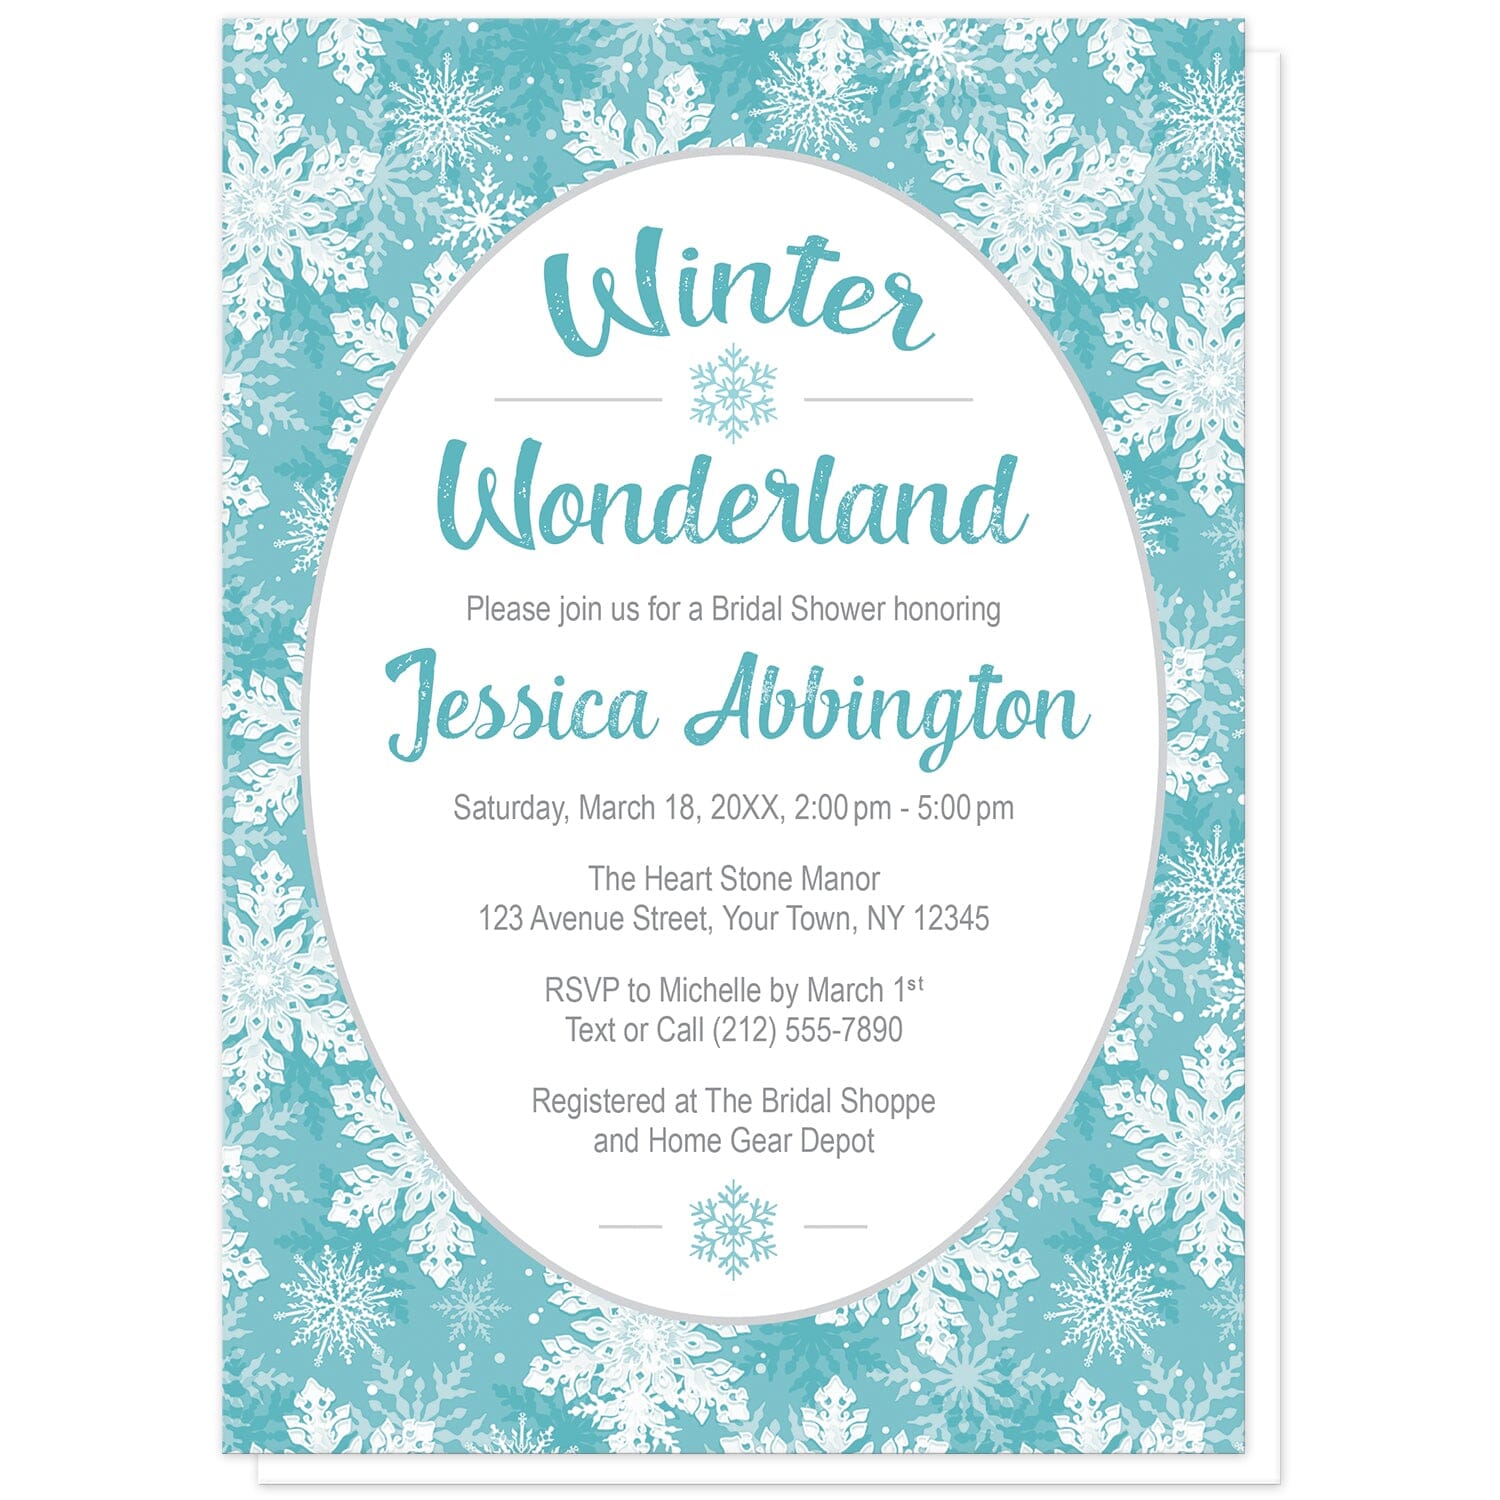 Teal Snowflake Winter Wonderland Bridal Shower Invitations at Artistically Invited. Beautifully ornate teal snowflake Winter Wonderland bridal shower invitations designed with your personalized bridal shower celebration details custom printed in teal and gray in a white oval frame design over a teal, turquoise, and white snowflake pattern background.